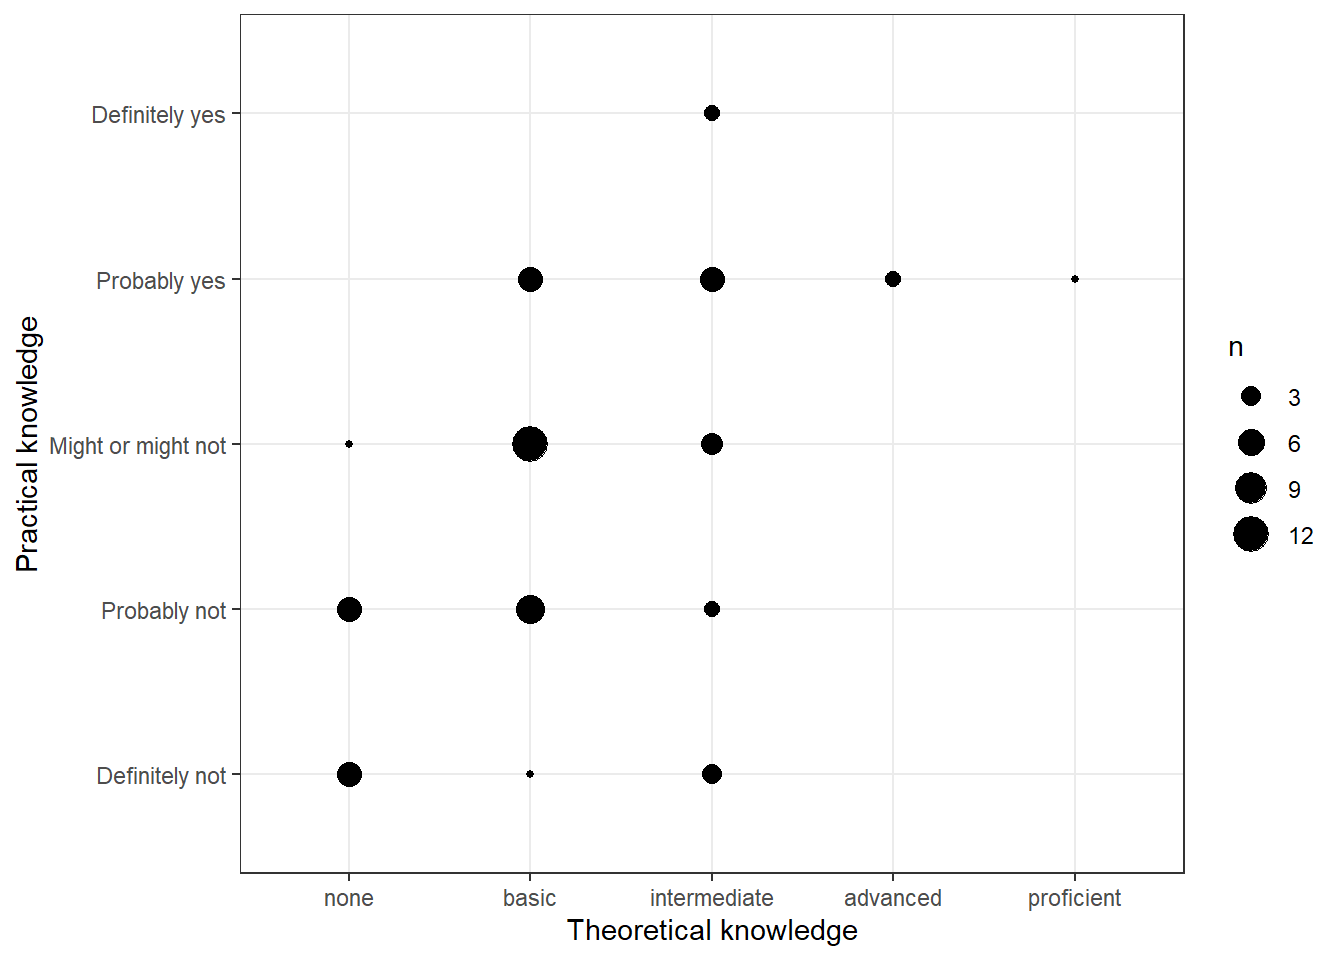 Covariation between categorical data (1)